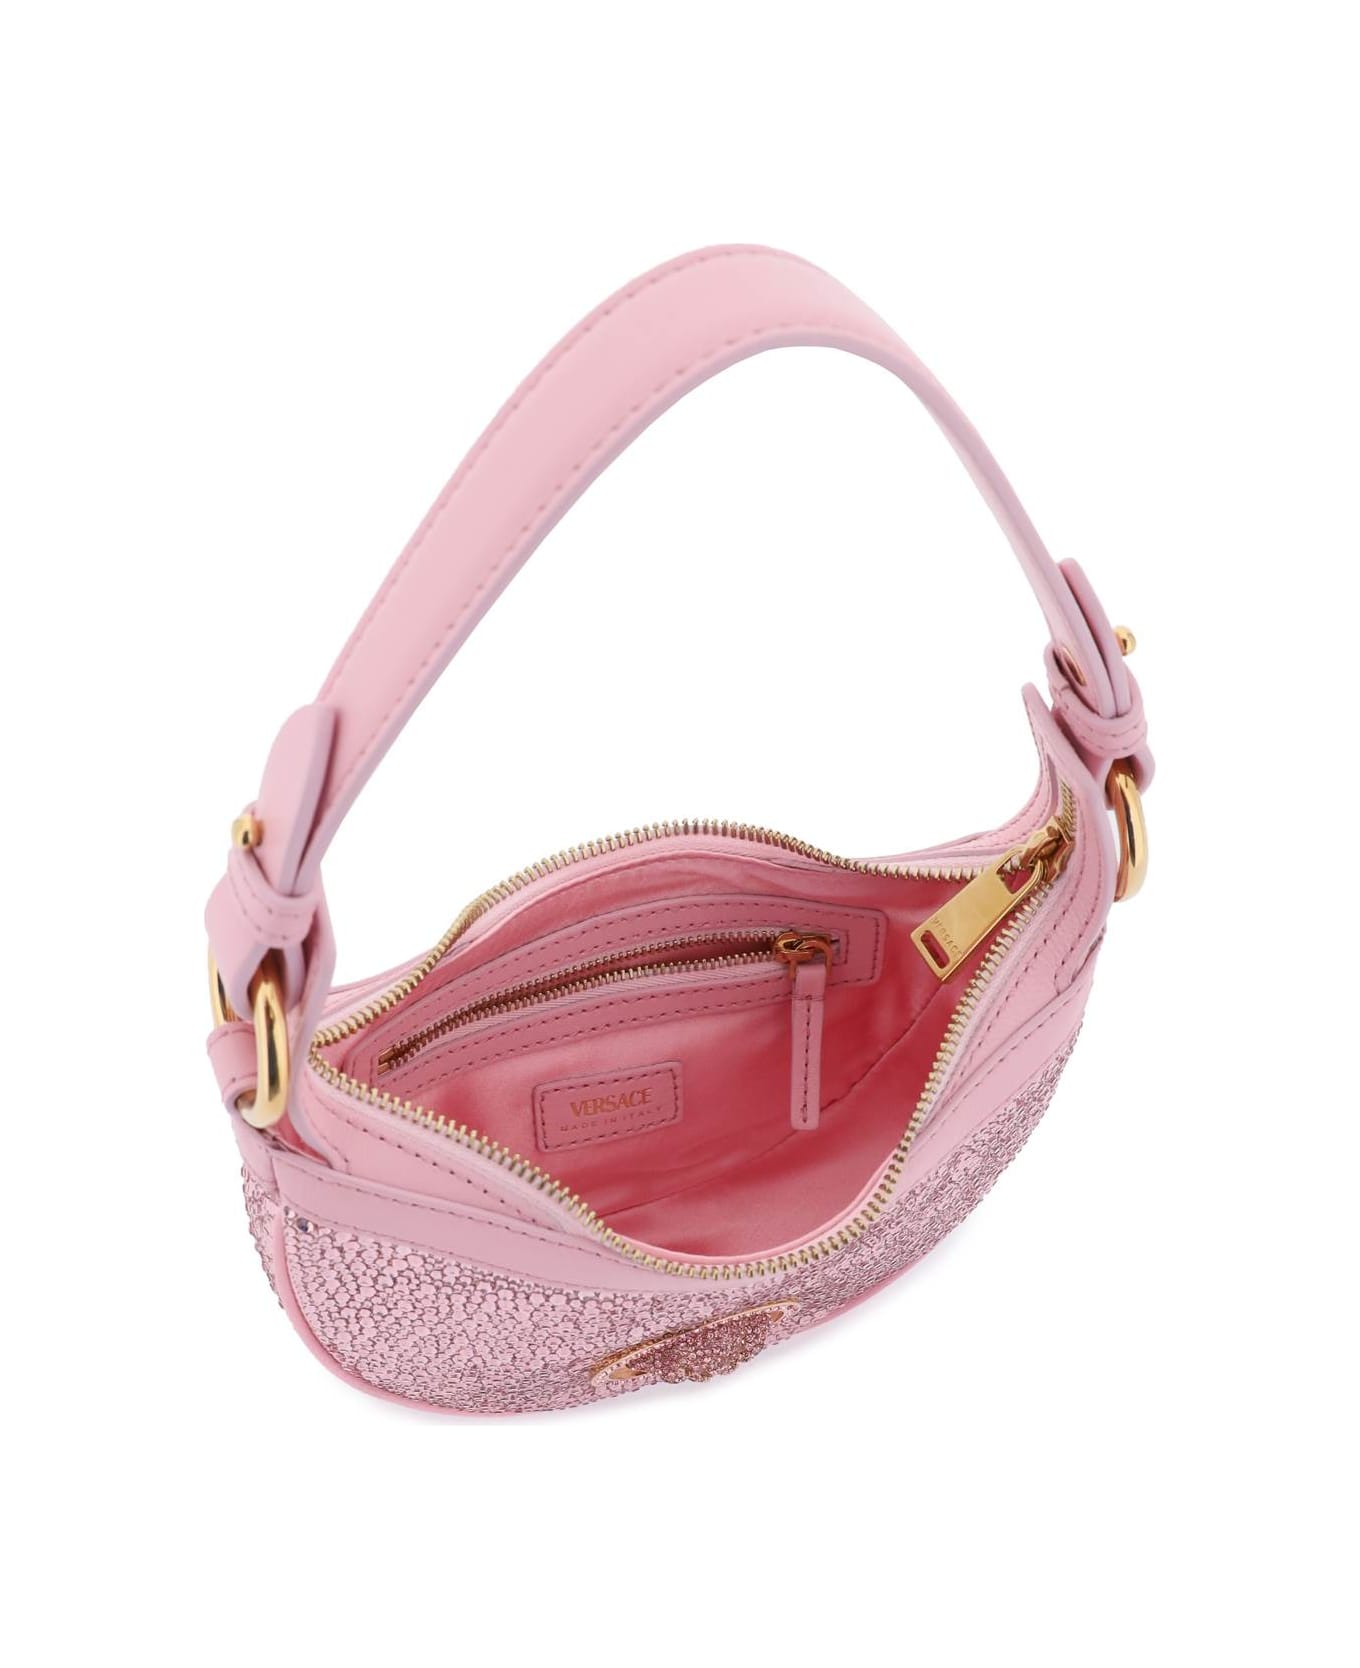 Versace Repeat Mini Hobo Bag With Crystals - PALE PINK VERSACE GOLD (Pink)